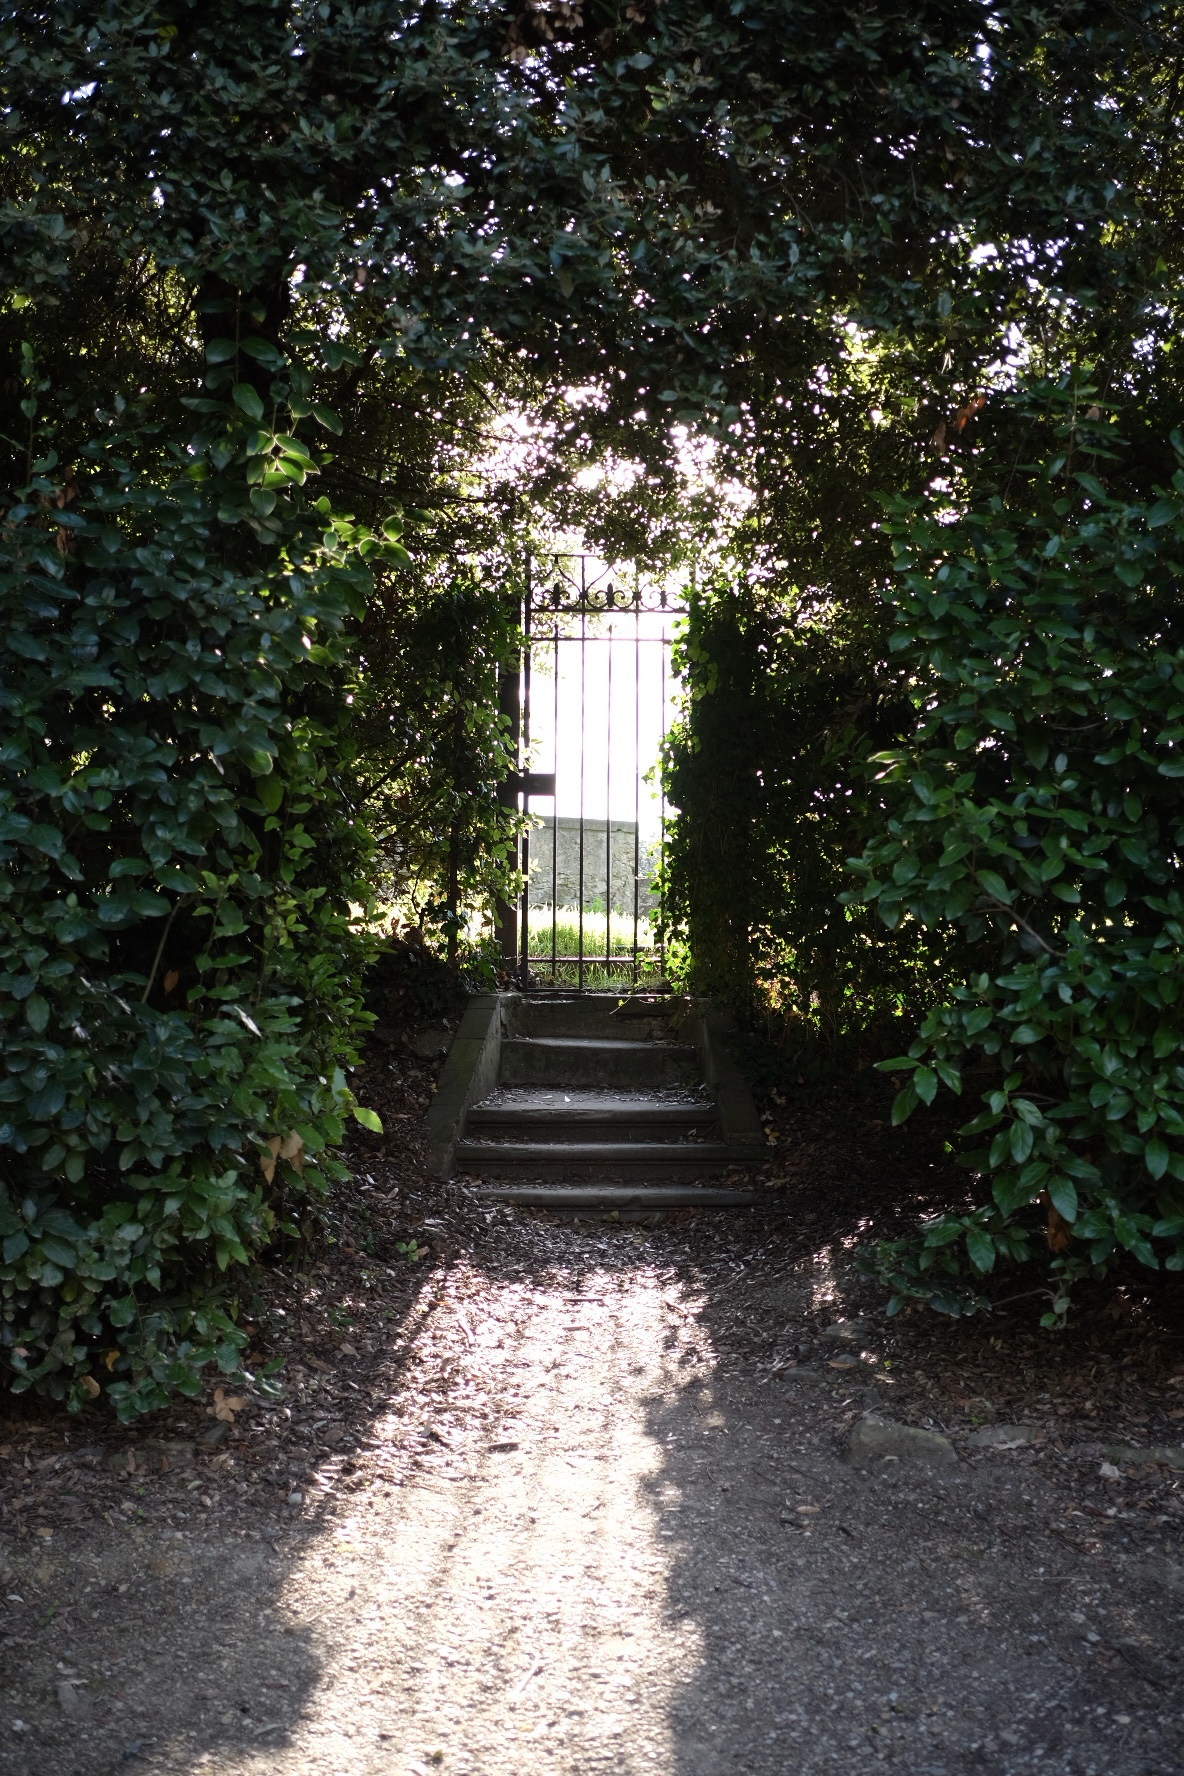 A few steps leading up to a small iron gate. Vertical bars with light flourishes across the top. A wall of green shrubs covers both sides and above.